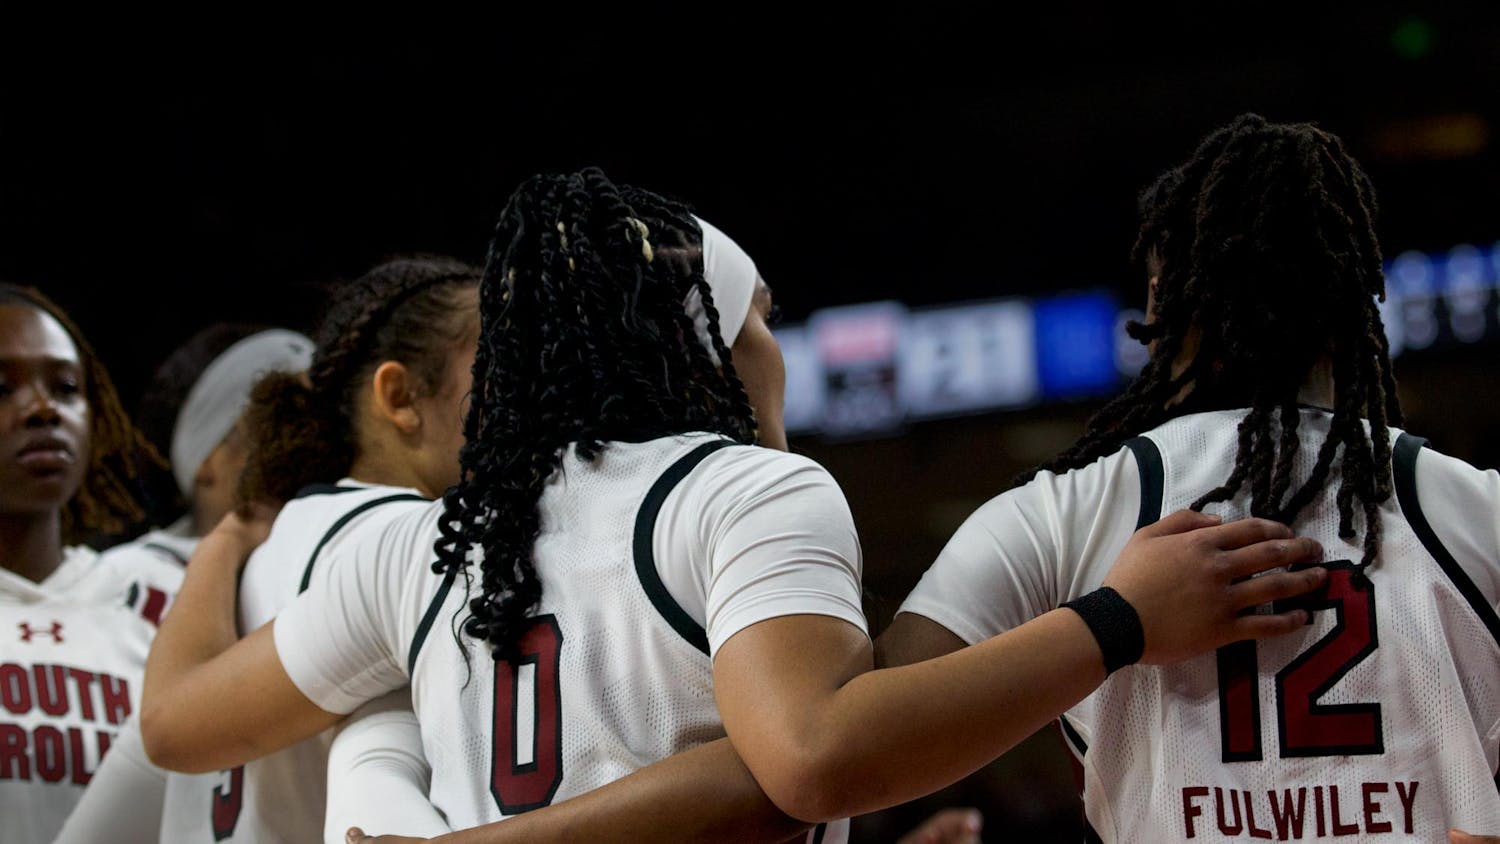 Freshman guard Tessa Johnson, senior guard Te-Hina Paopao and freshman guard MiLaysia Fulwiley huddle together during a timeout against the Kentucky Wildcats. The trio contributed 39 points during South Carolina’s 98-36 victory over Kentucky on Jan. 15, 2023.